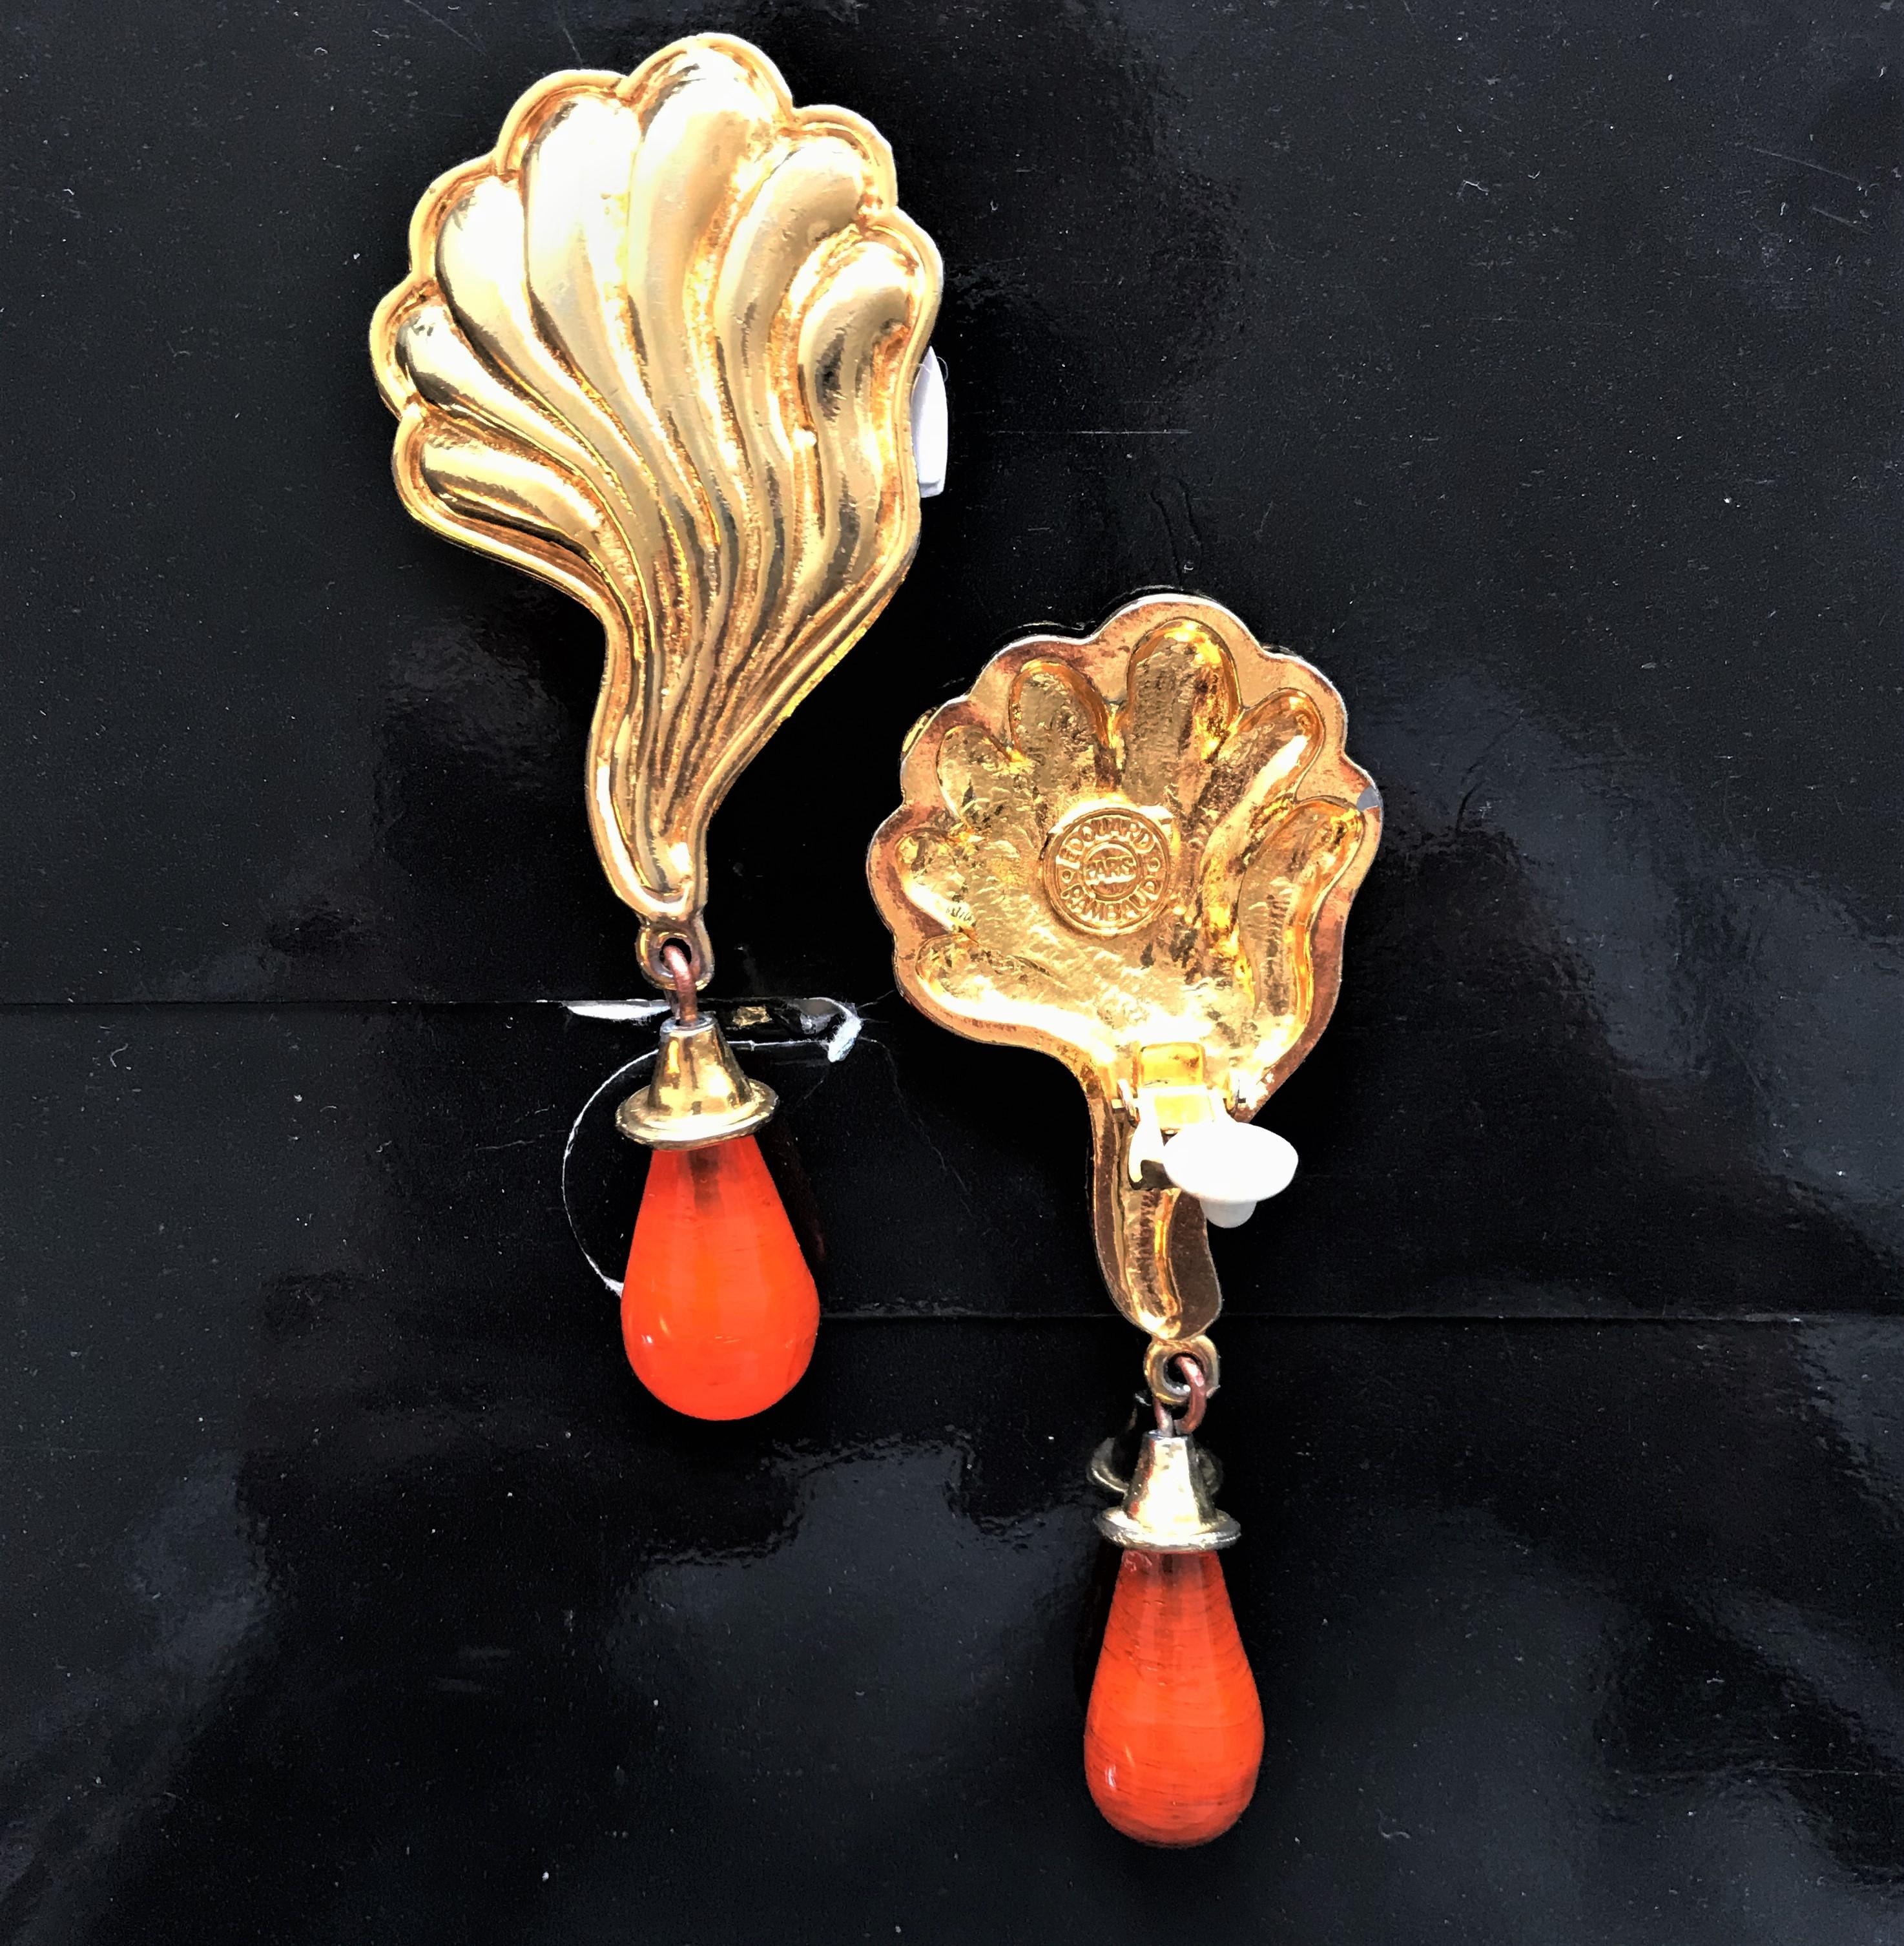 A very stylish ear clip from Eduard Ramboud Paris in the form of a shell-shaped leaf with attached orange colored glass drops.
Measurement: full length 10 cm, orange drops 3 cm, width 4 cm.
Please note, one orange drop is slightly darker than the